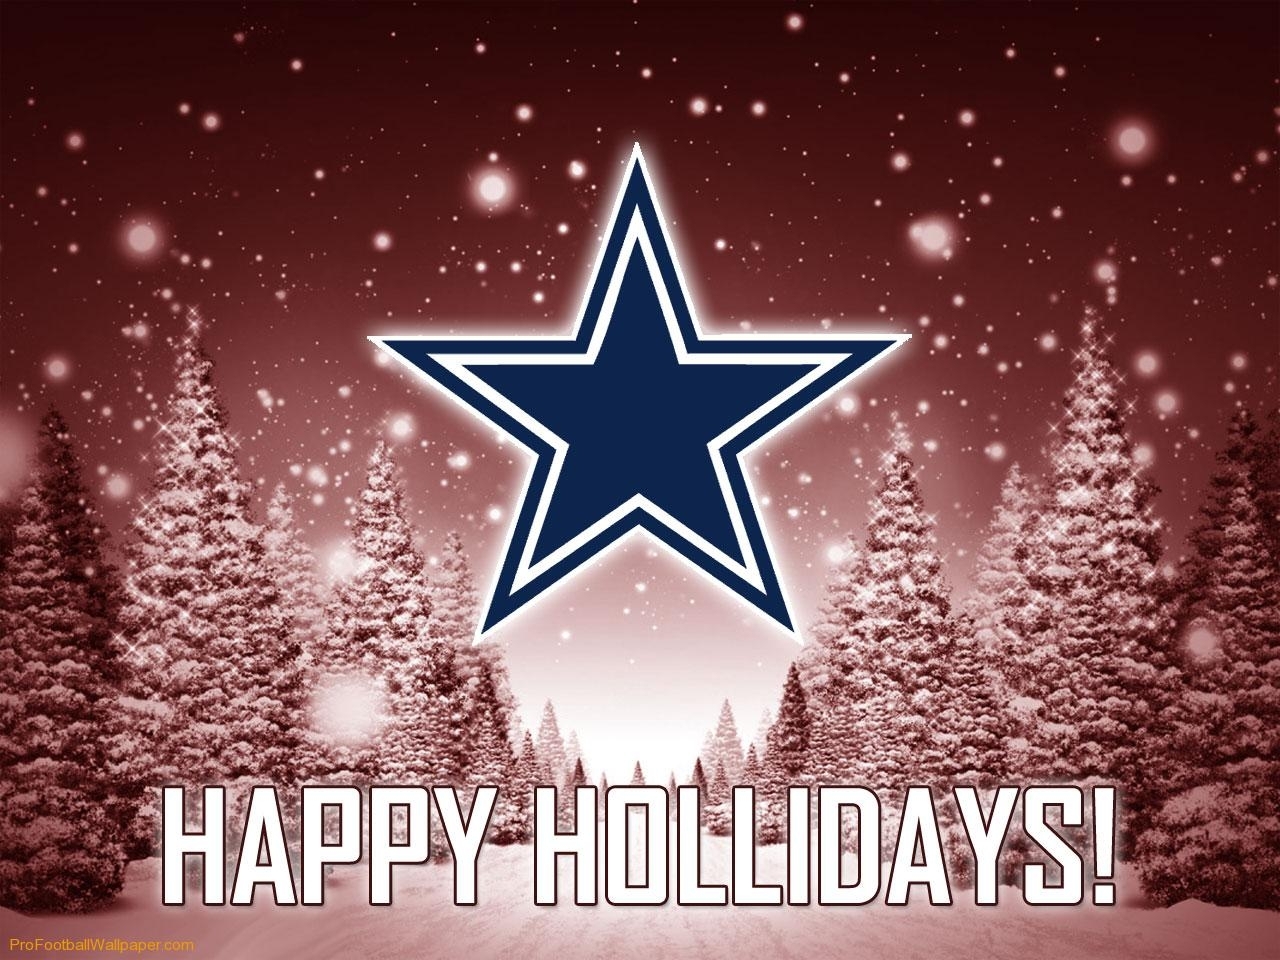 10 Best Dallas Cowboys Christmas Pictures FULL HD 1080p For PC Background